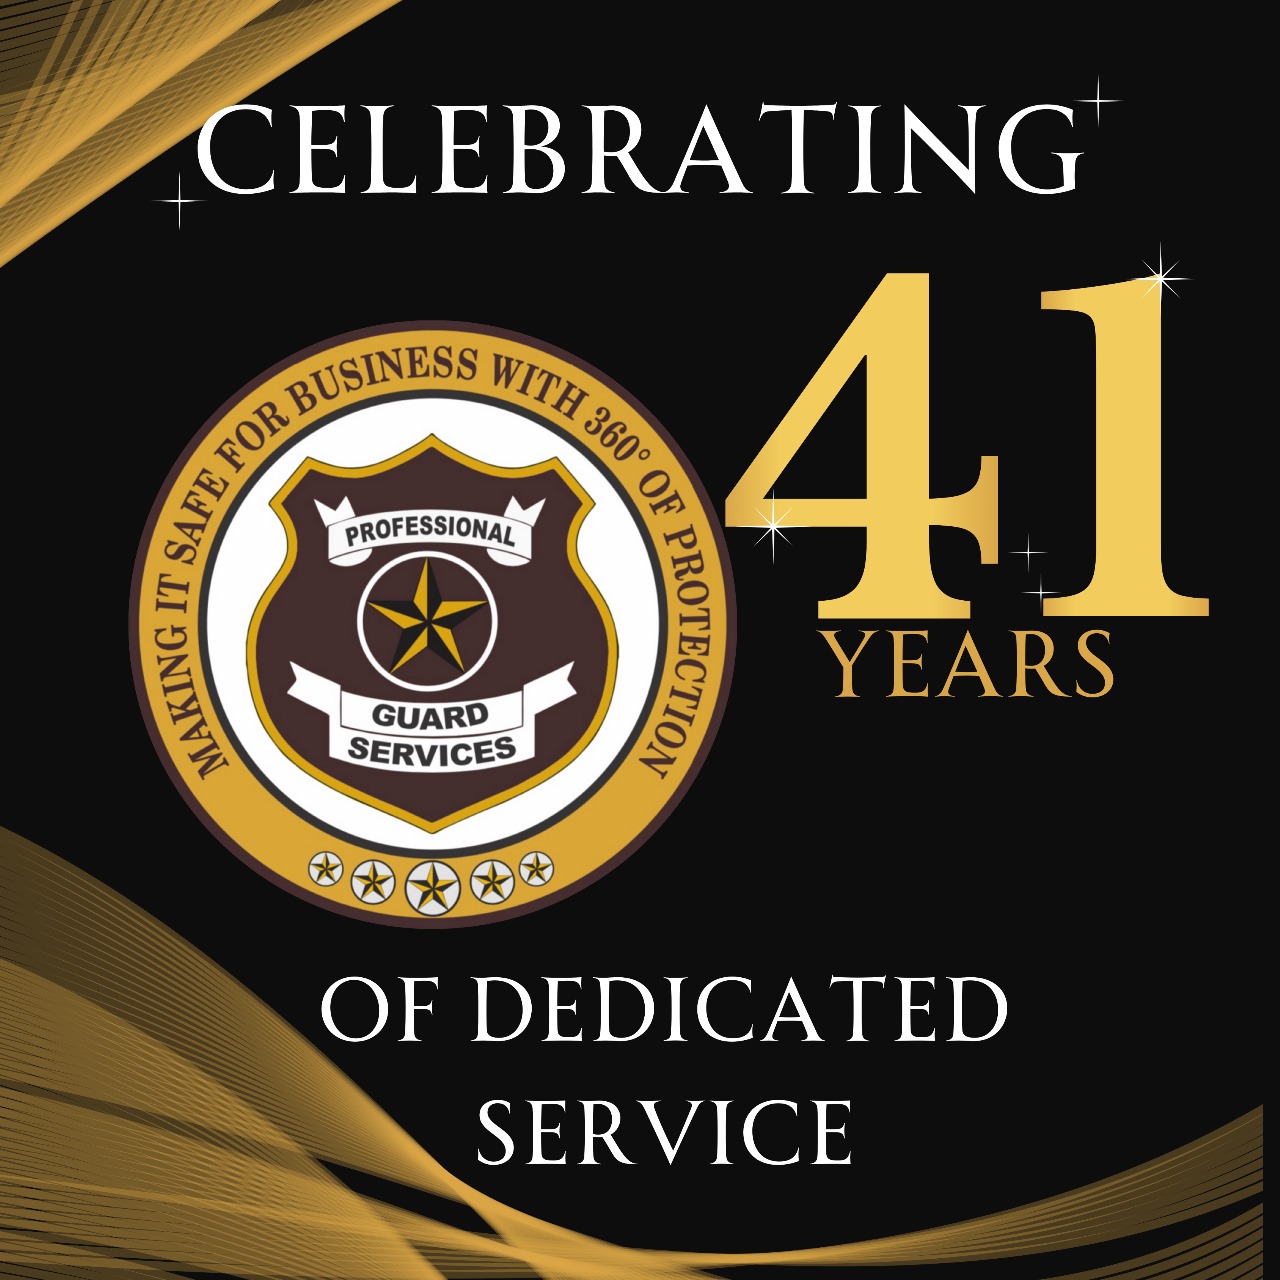 Professional Guard Services celebrates 41 years